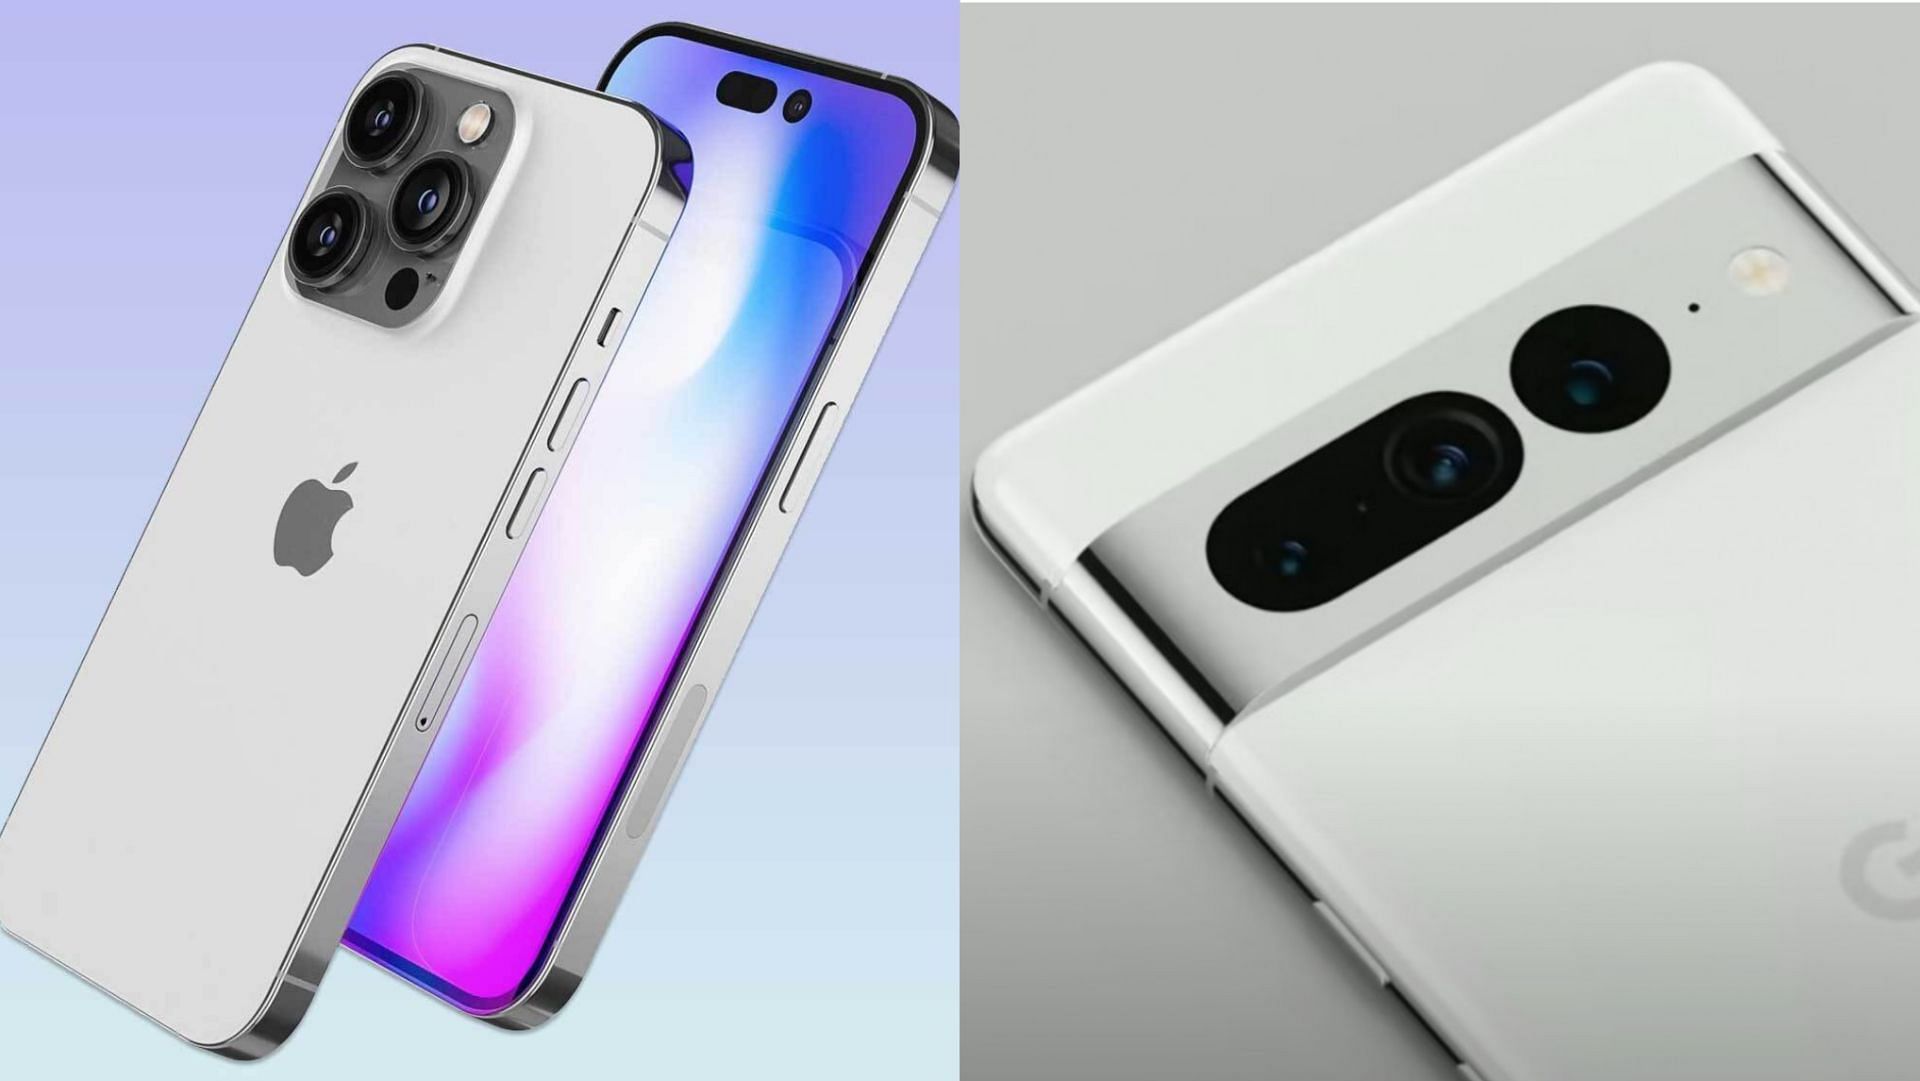 The two devices are expected to dominate the premium mobile phone market in the coming days (Images via Apple, Google)